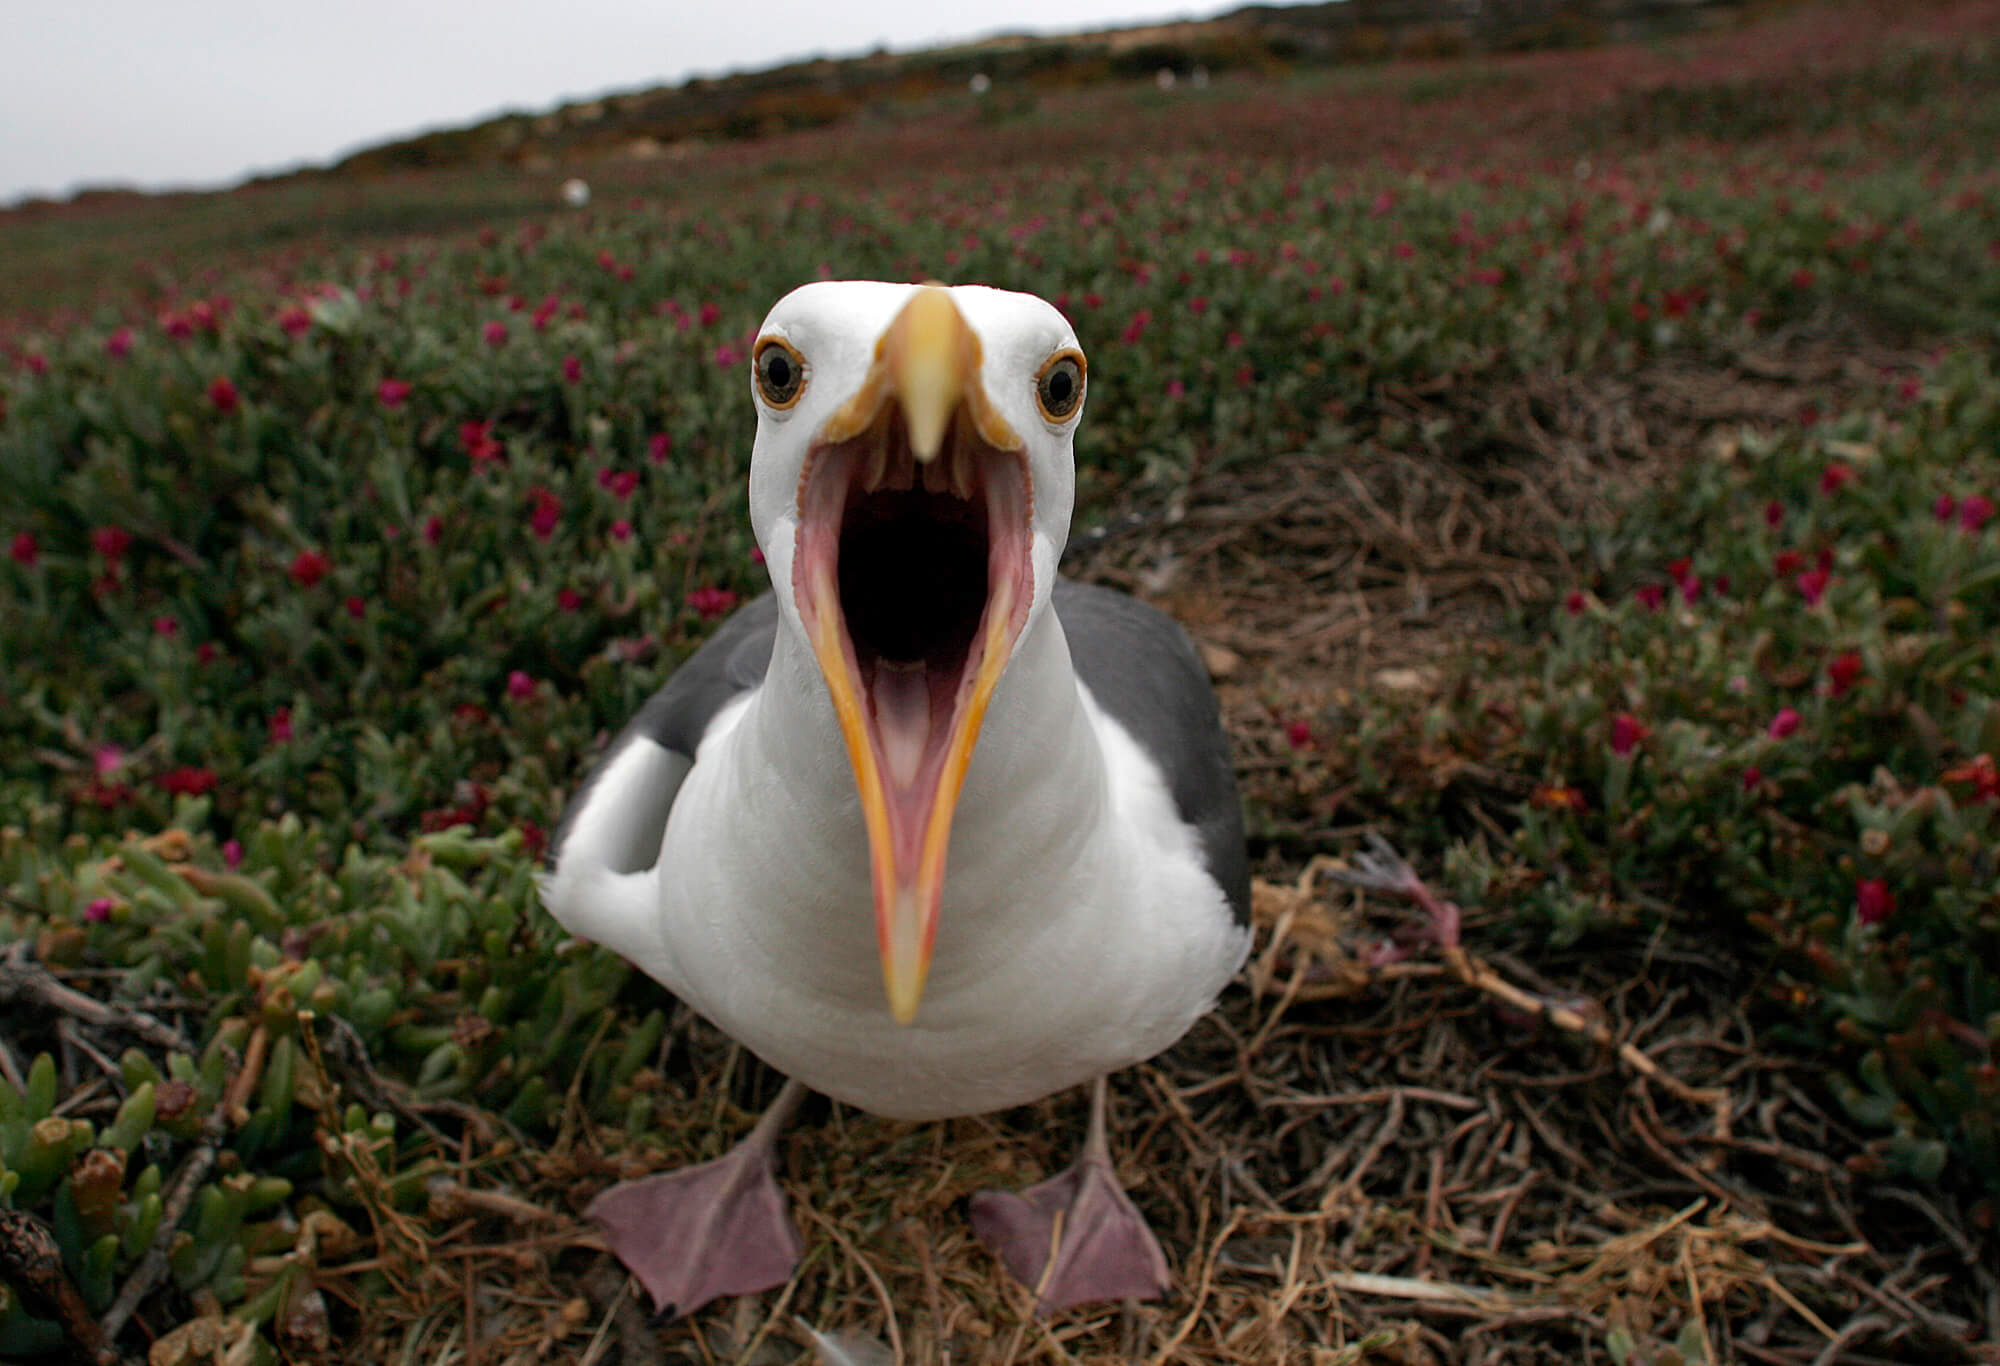 Paul McCartney said The Beatles' "Tomorrow Never Knows" sounds like a seagull (pictured)